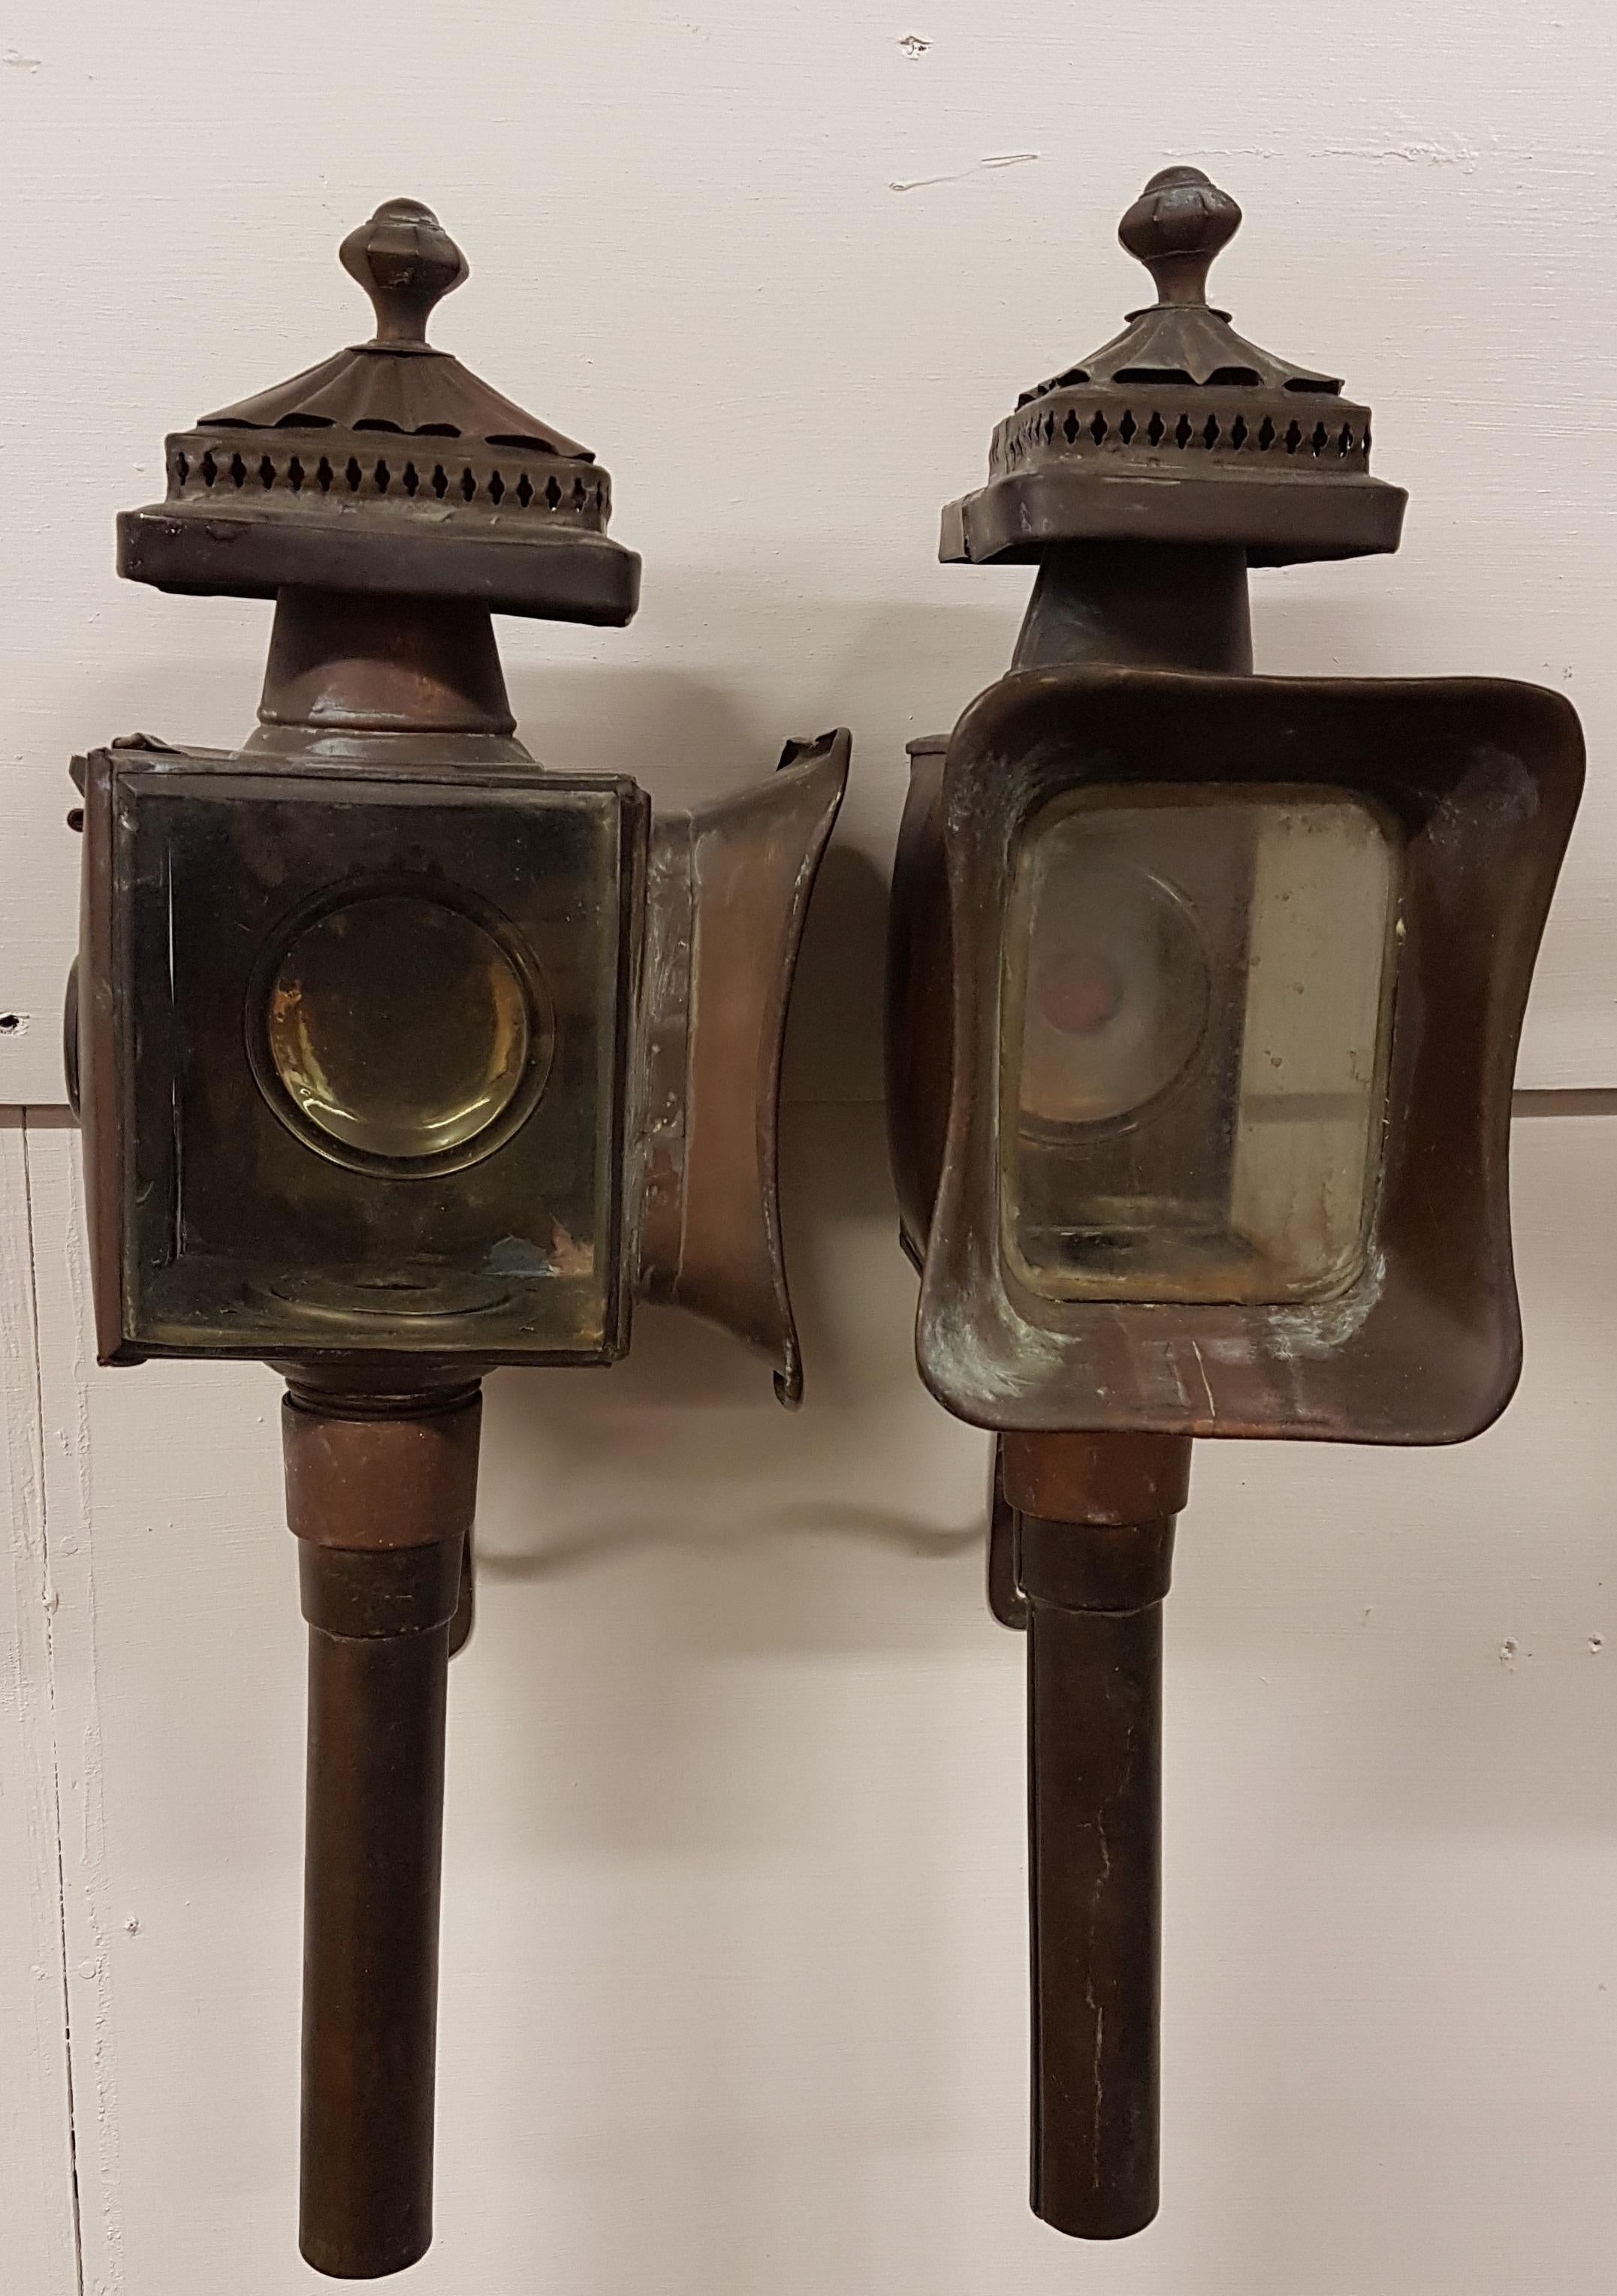 A very nice pair of early 1980s reproduction carriage lanterns from the Limehouse Lamp Company. This is a company that specializes in the highest quality exact copies of original examples. They are in very good condition with a nice amount of